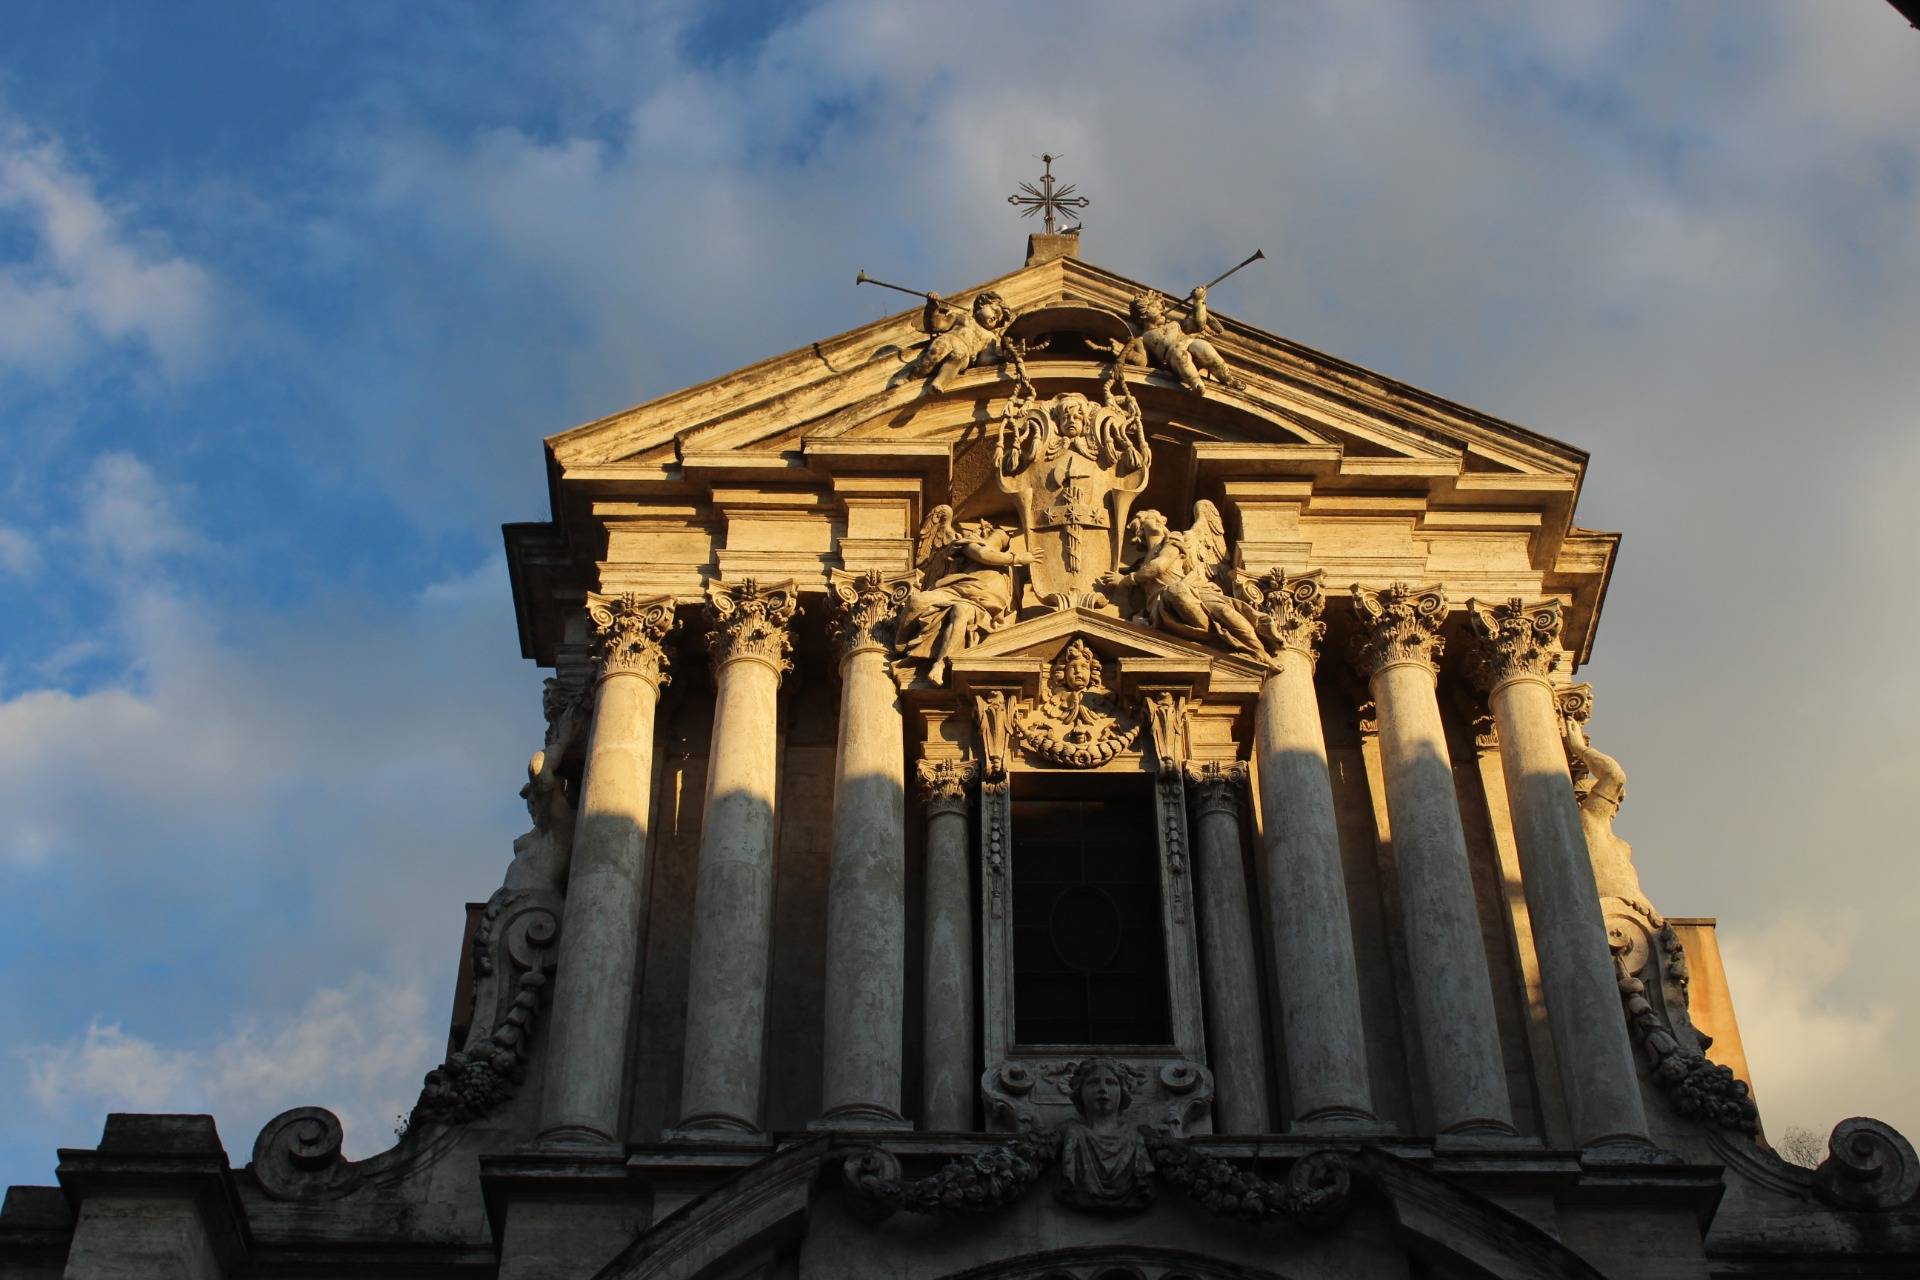 My long weekend in Rome no.8 - Baroque